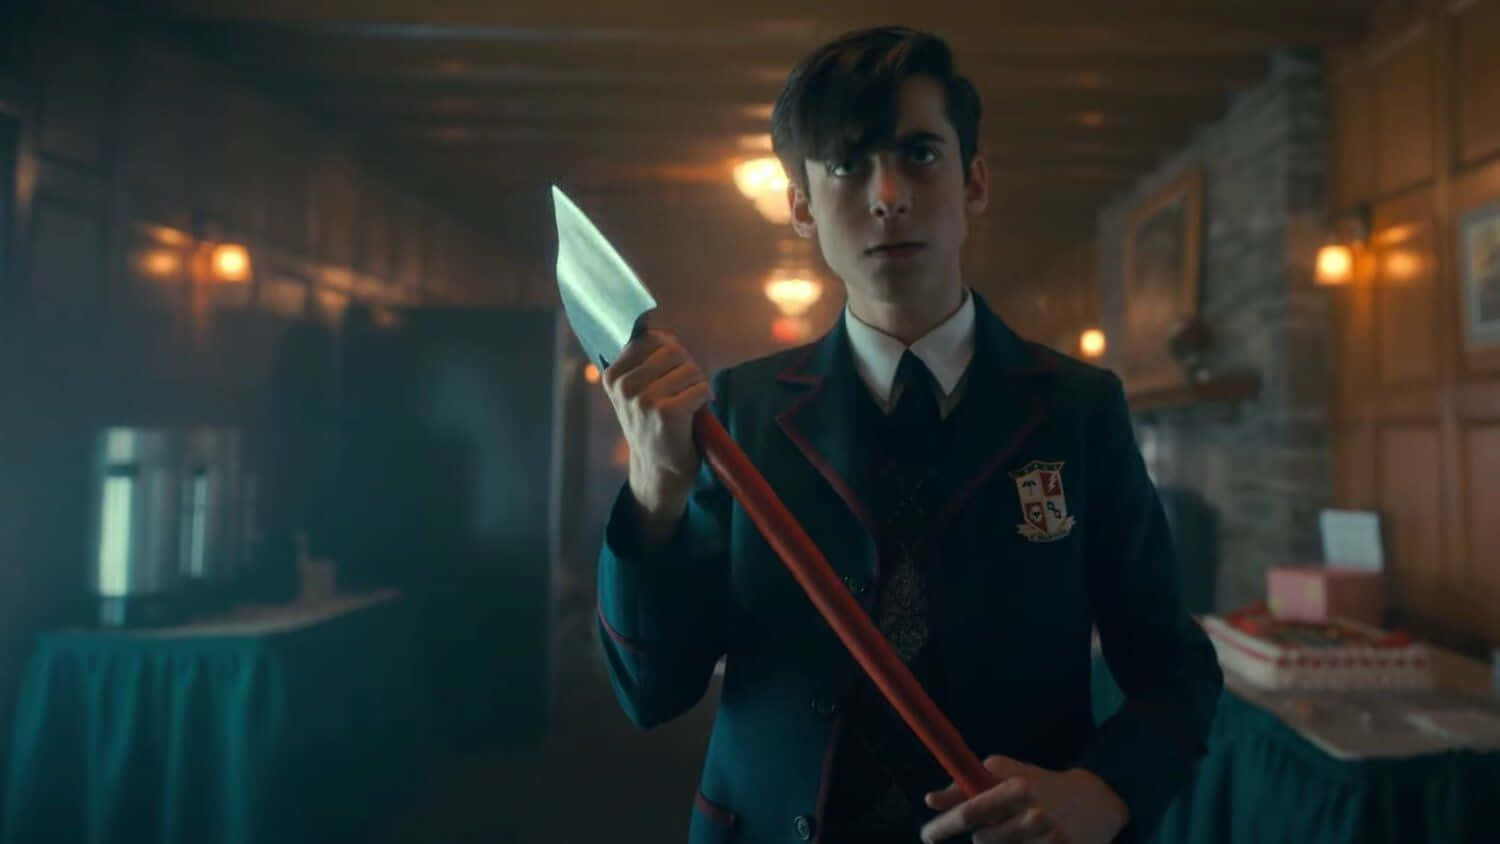 A Young Man In A School Uniform Holding A Large Knife Wallpaper